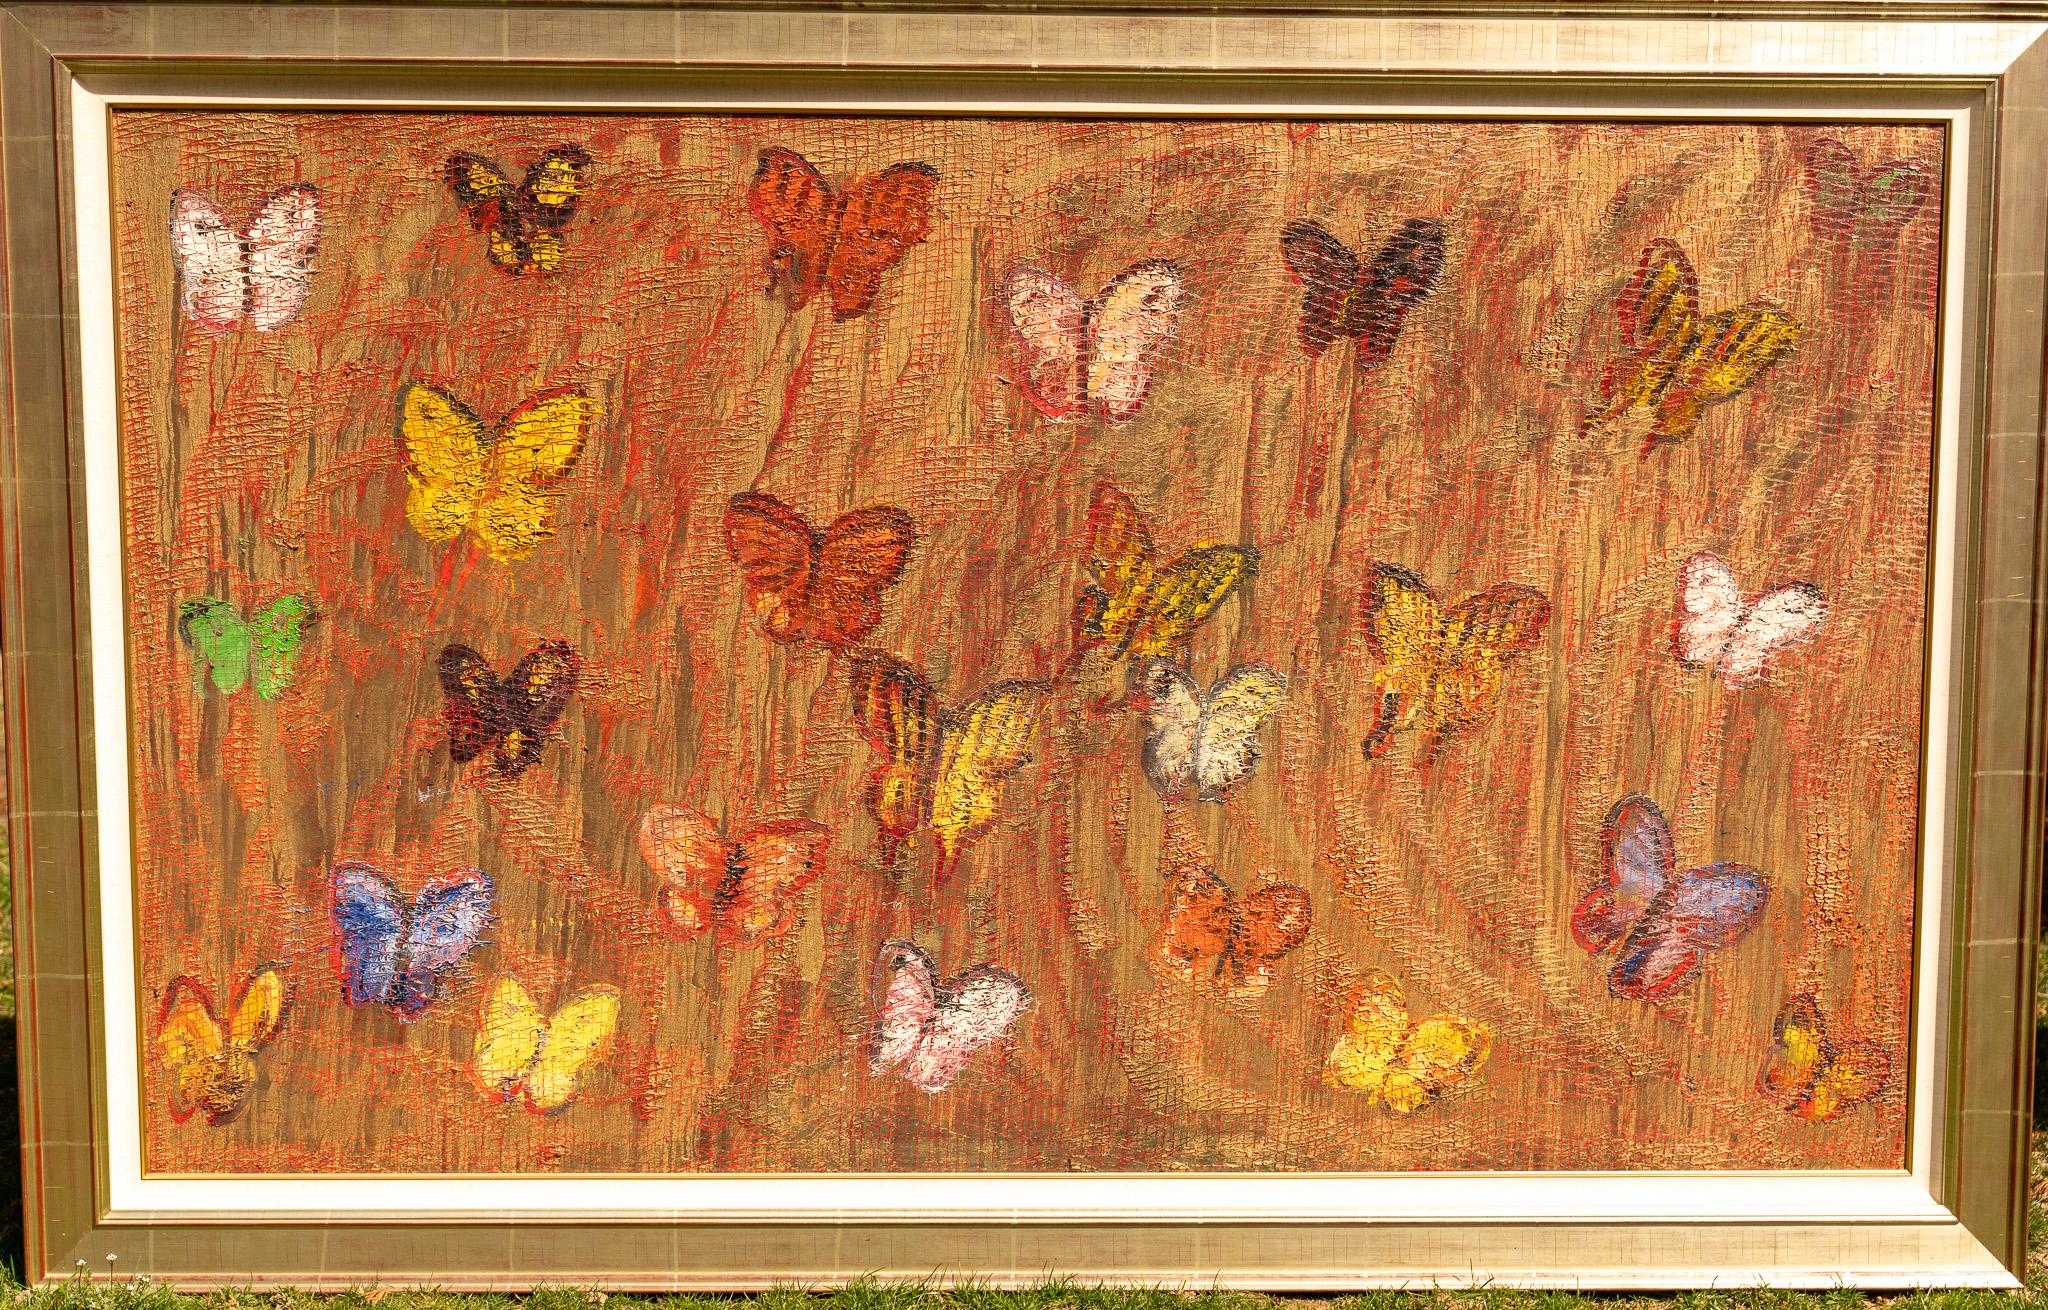 Hand-Painted Hunt Slonem 1951       'Red Ascension, Oil on Canvas  2008 For Sale